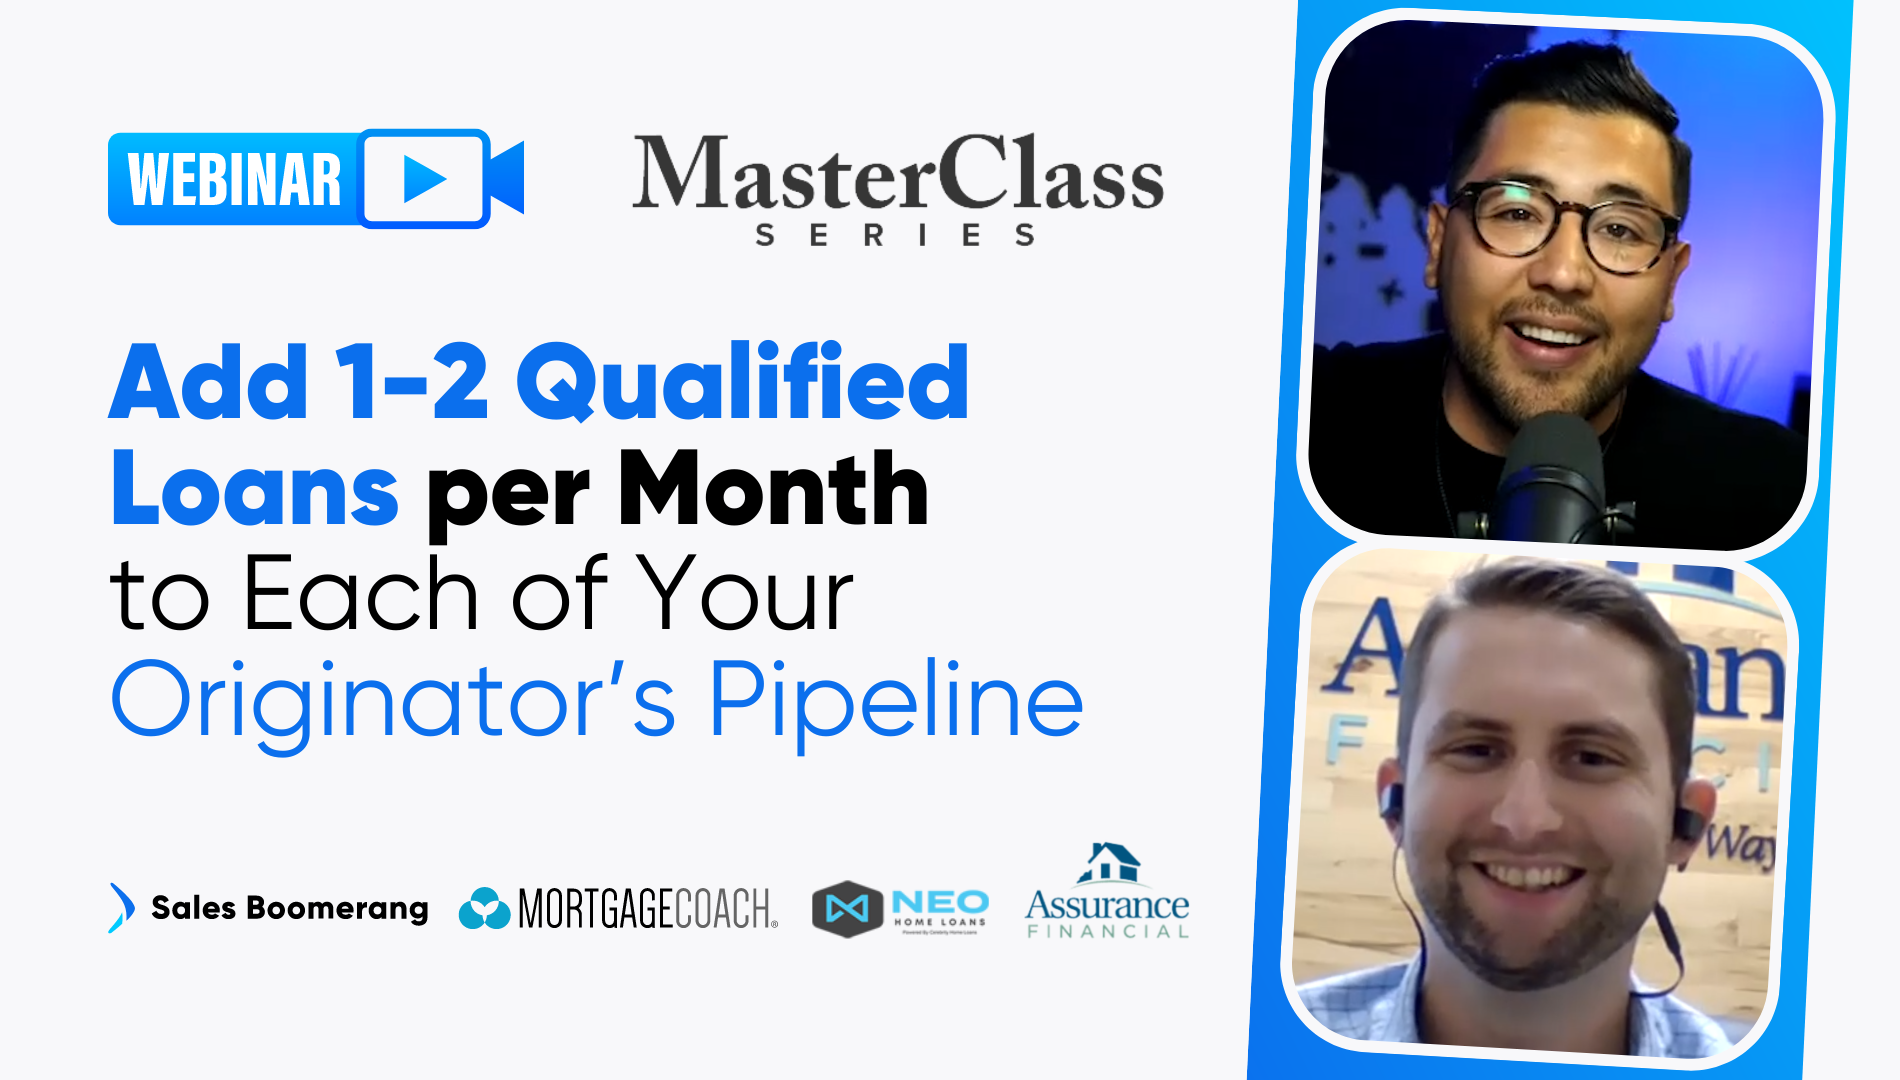 MasterClass #1: How to Add 1-2 Qualified Loans per Month to each of your Originator’s Pipeline